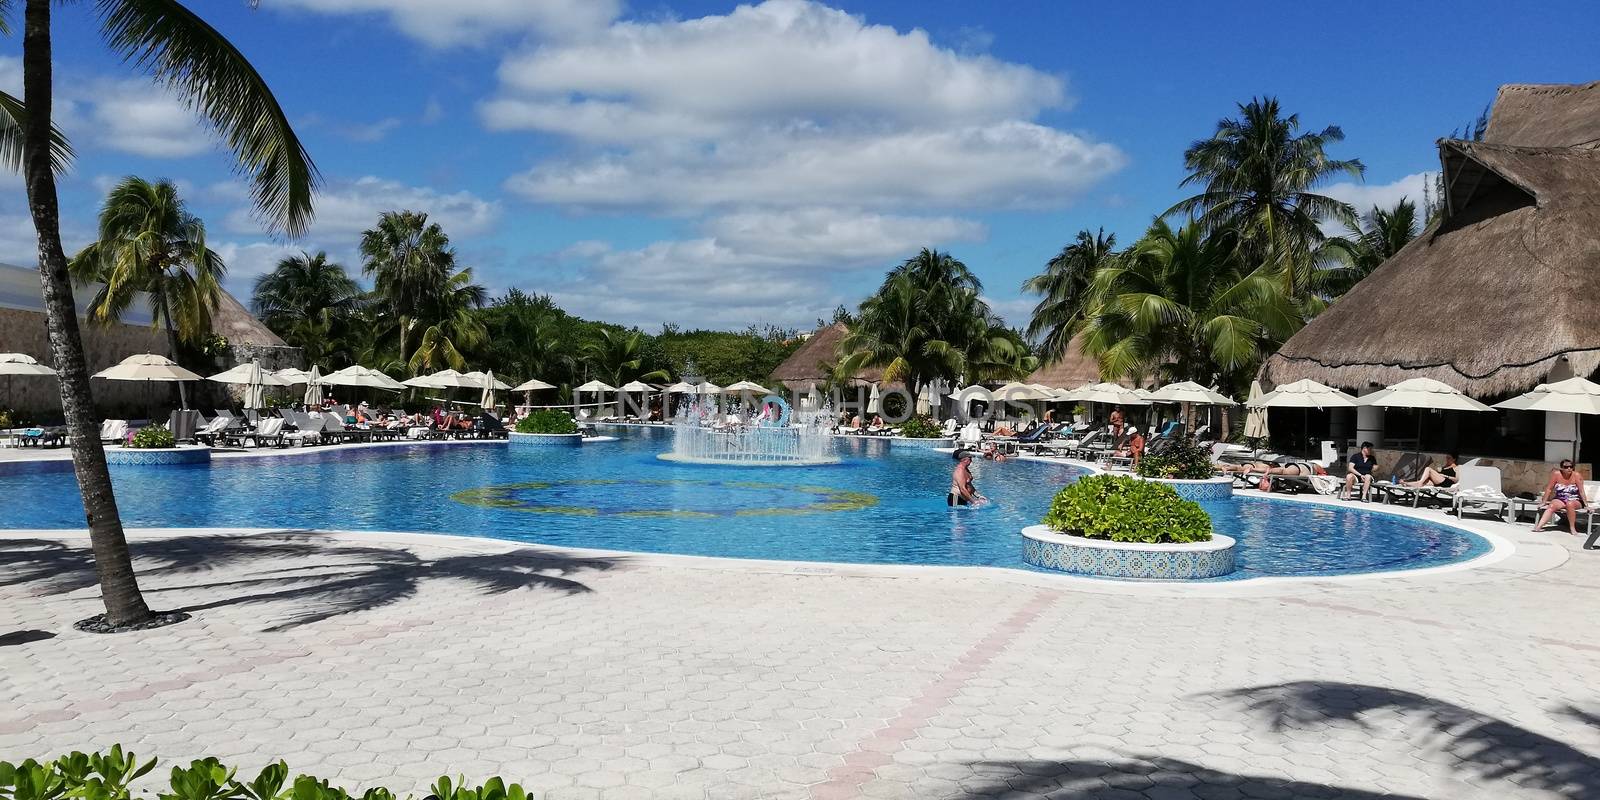 CANCUN, MEXICO 25 MARCH 2020: Mexican resort pool in sunny day